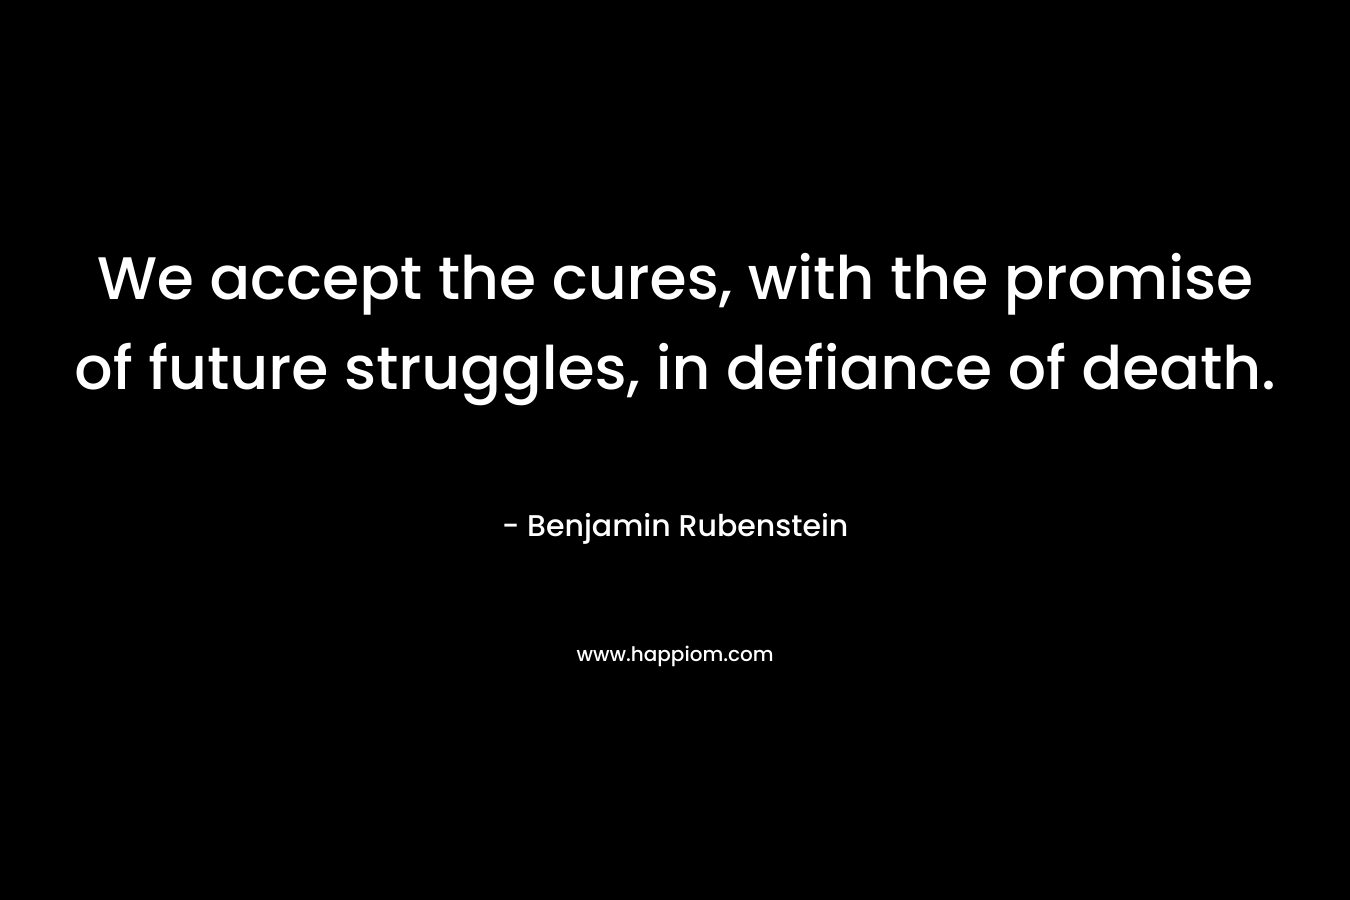 We accept the cures, with the promise of future struggles, in defiance of death. – Benjamin Rubenstein